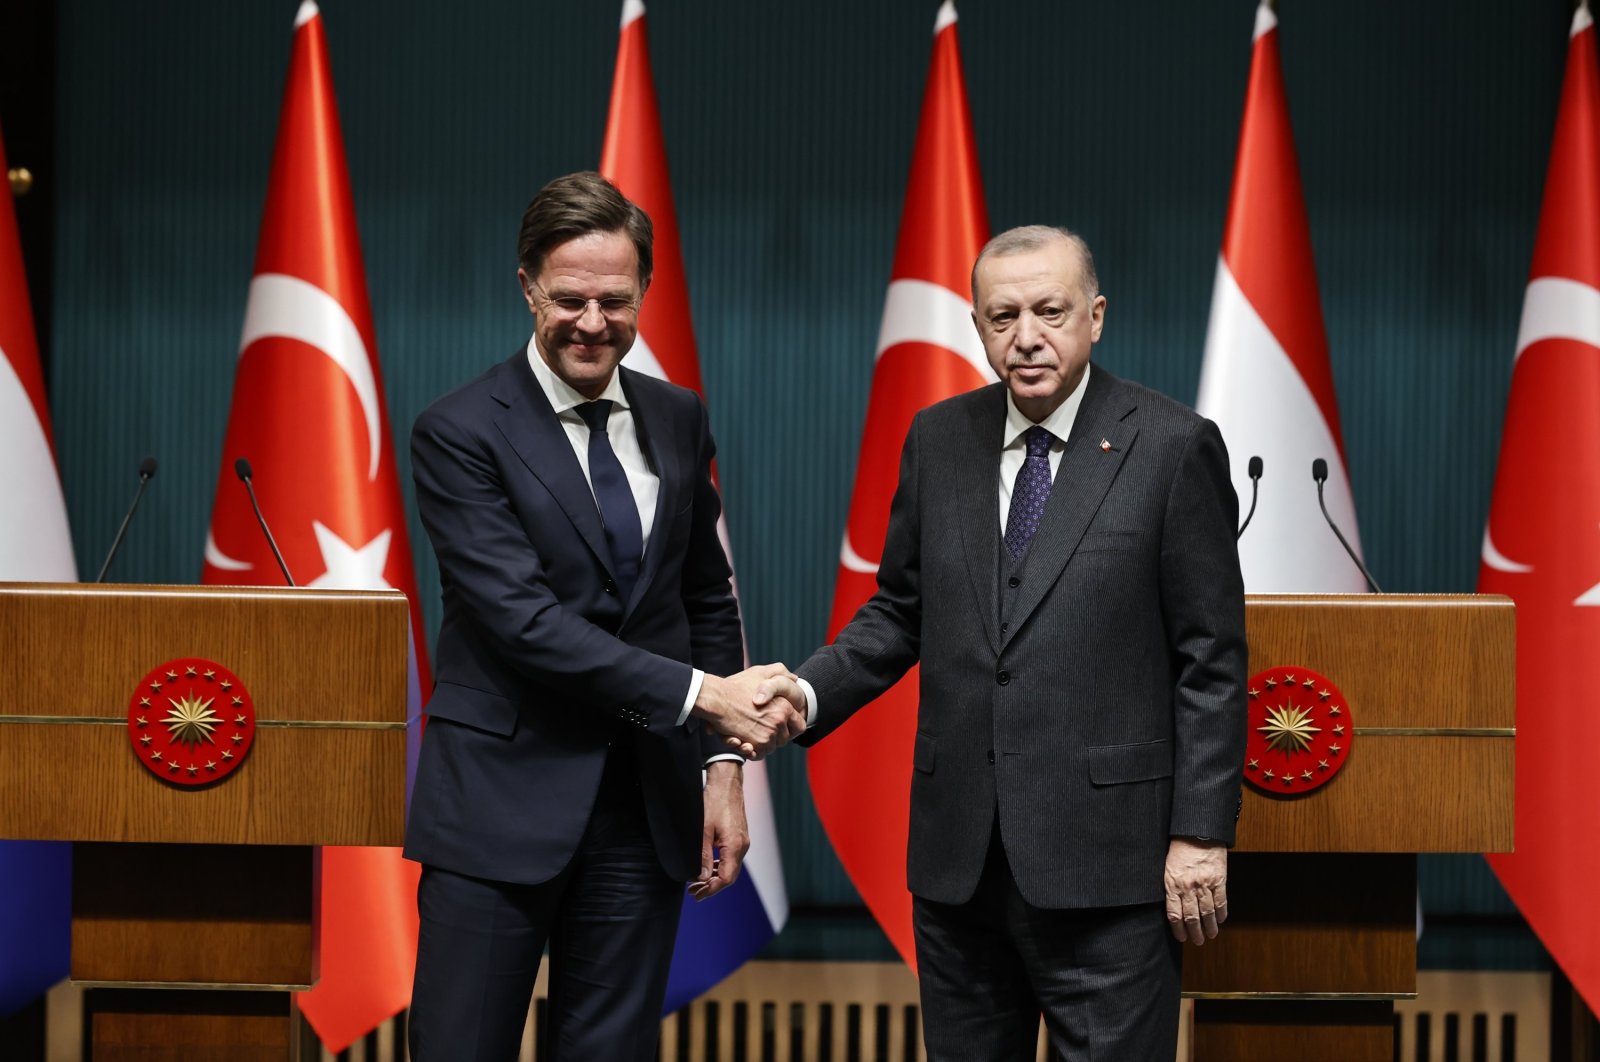 President Recep Tayyip Erdoğan and Dutch Prime Minister Mark Rutte shake hands at a joint news conference after their meeting in the capital Ankara, Türkiye, March 22, 2022. (AA Photo)